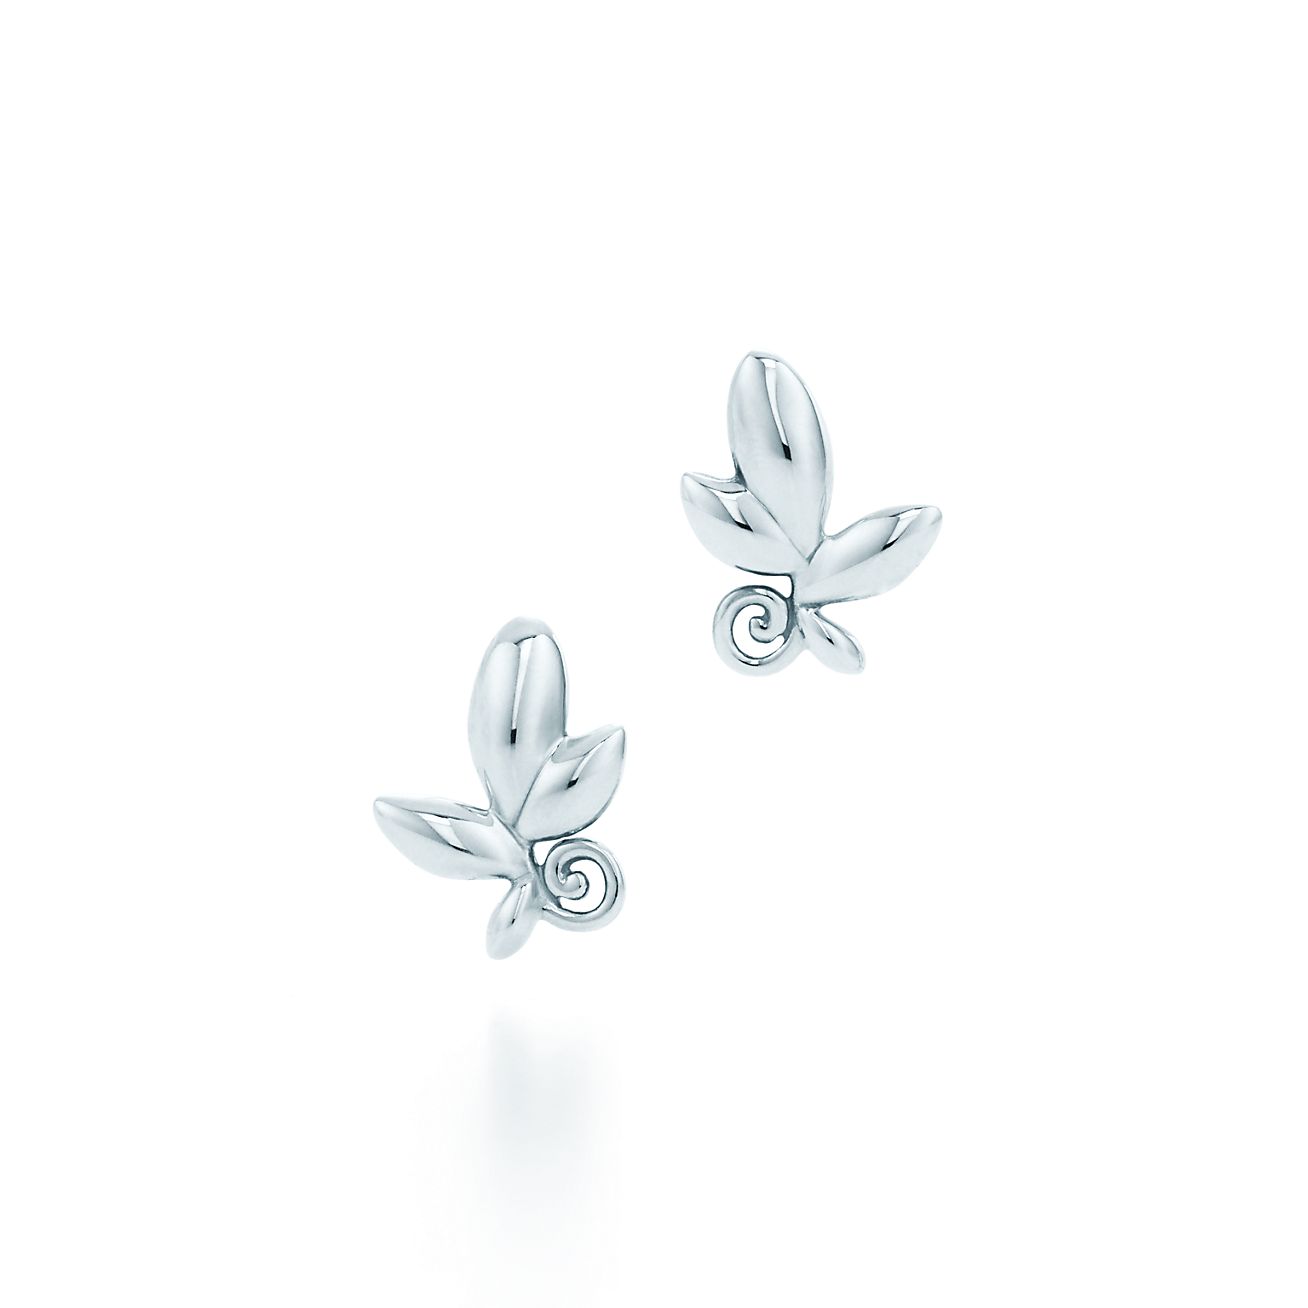 Paloma Picasso® Olive Leaf earrings in sterling silver. | Tiffany & Co.